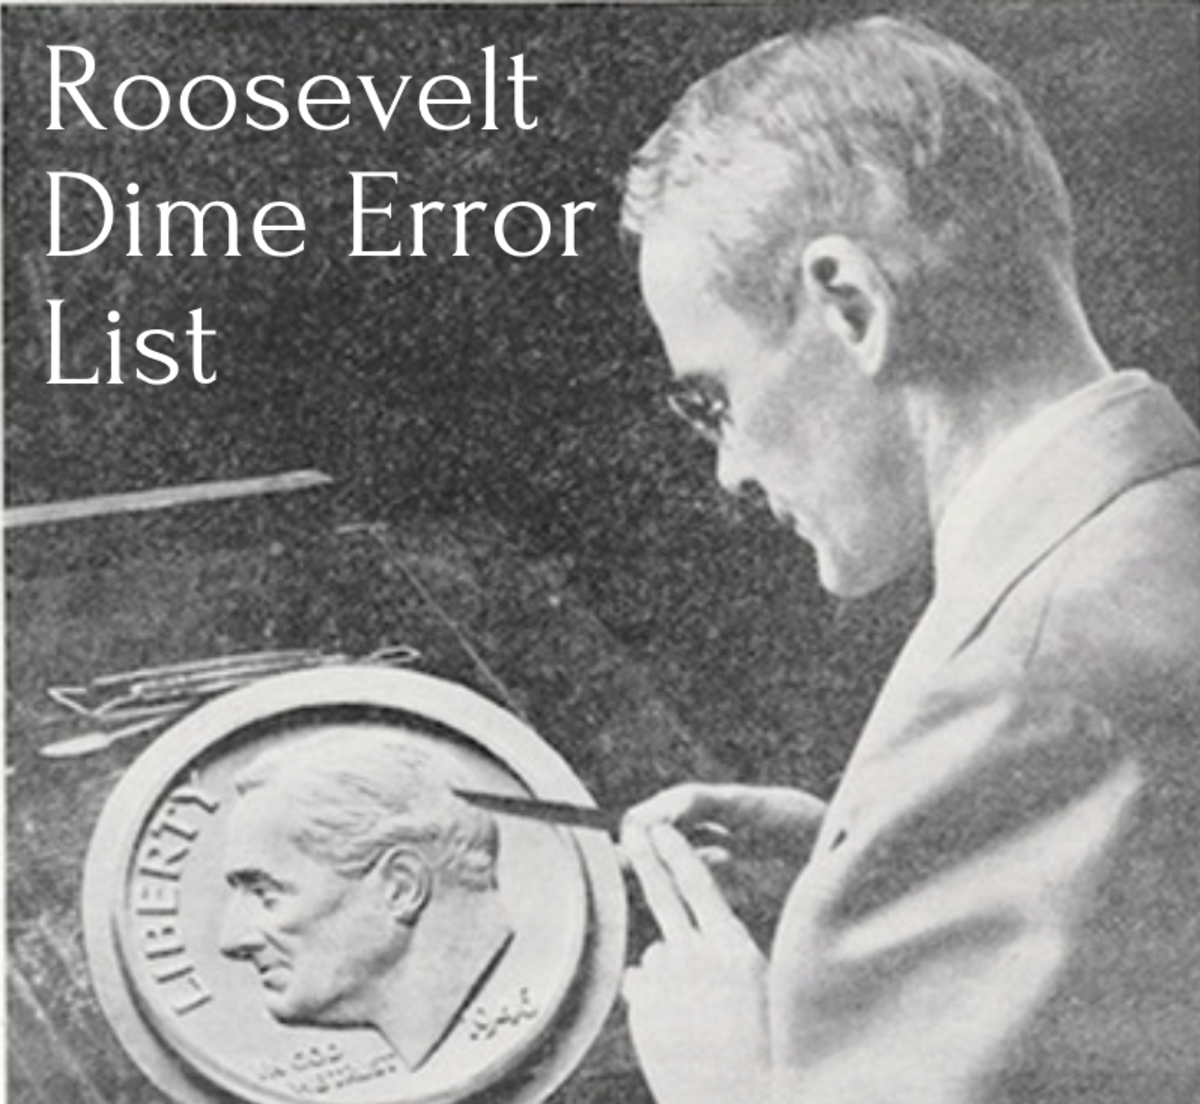 FOUR COINS-IN STOCK Gem Proof 2012 S through 2015 S Proof Roosevelt Dimes